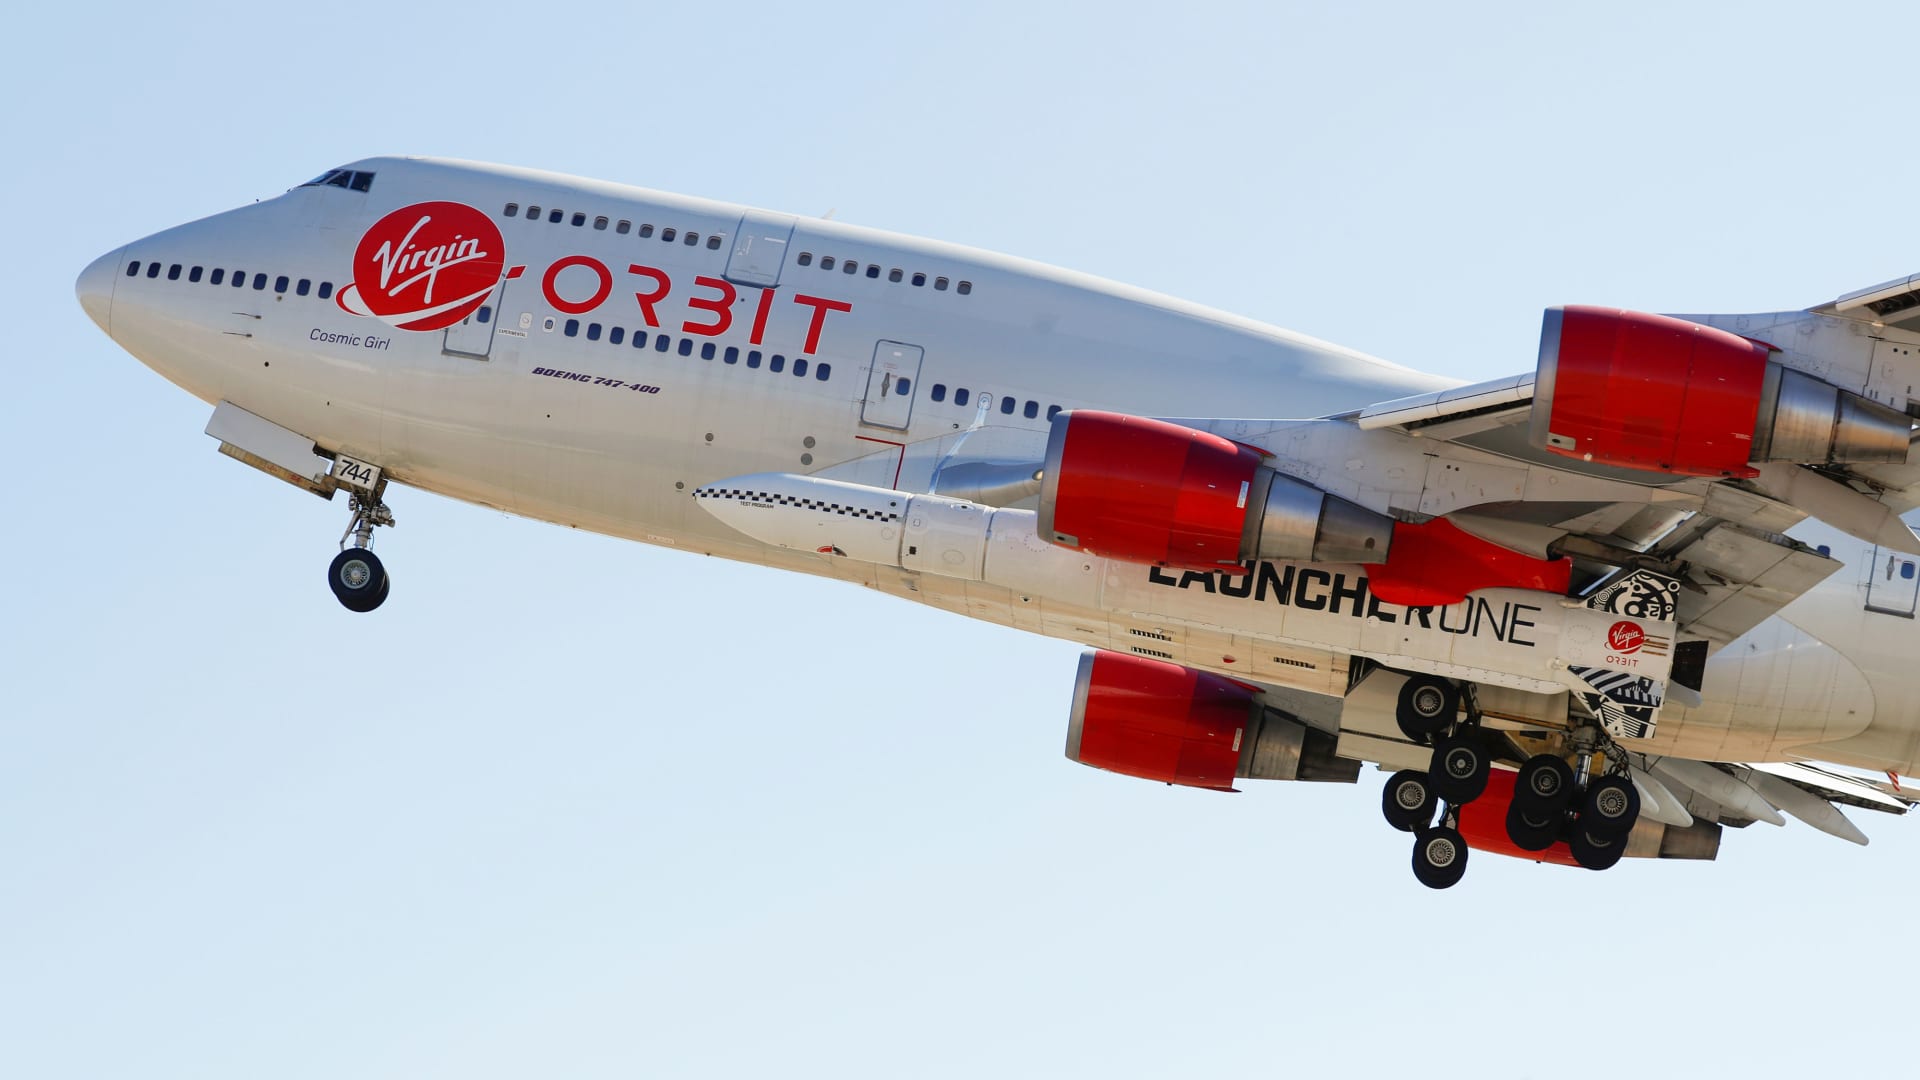 Richard Branson's Virgin Orbit, with a rocket under the wing of a modified Boeing 747 jetliner, takes off for a key drop test of its high-altitude launch system for satellites from Mojave, California, July 10, 2019.